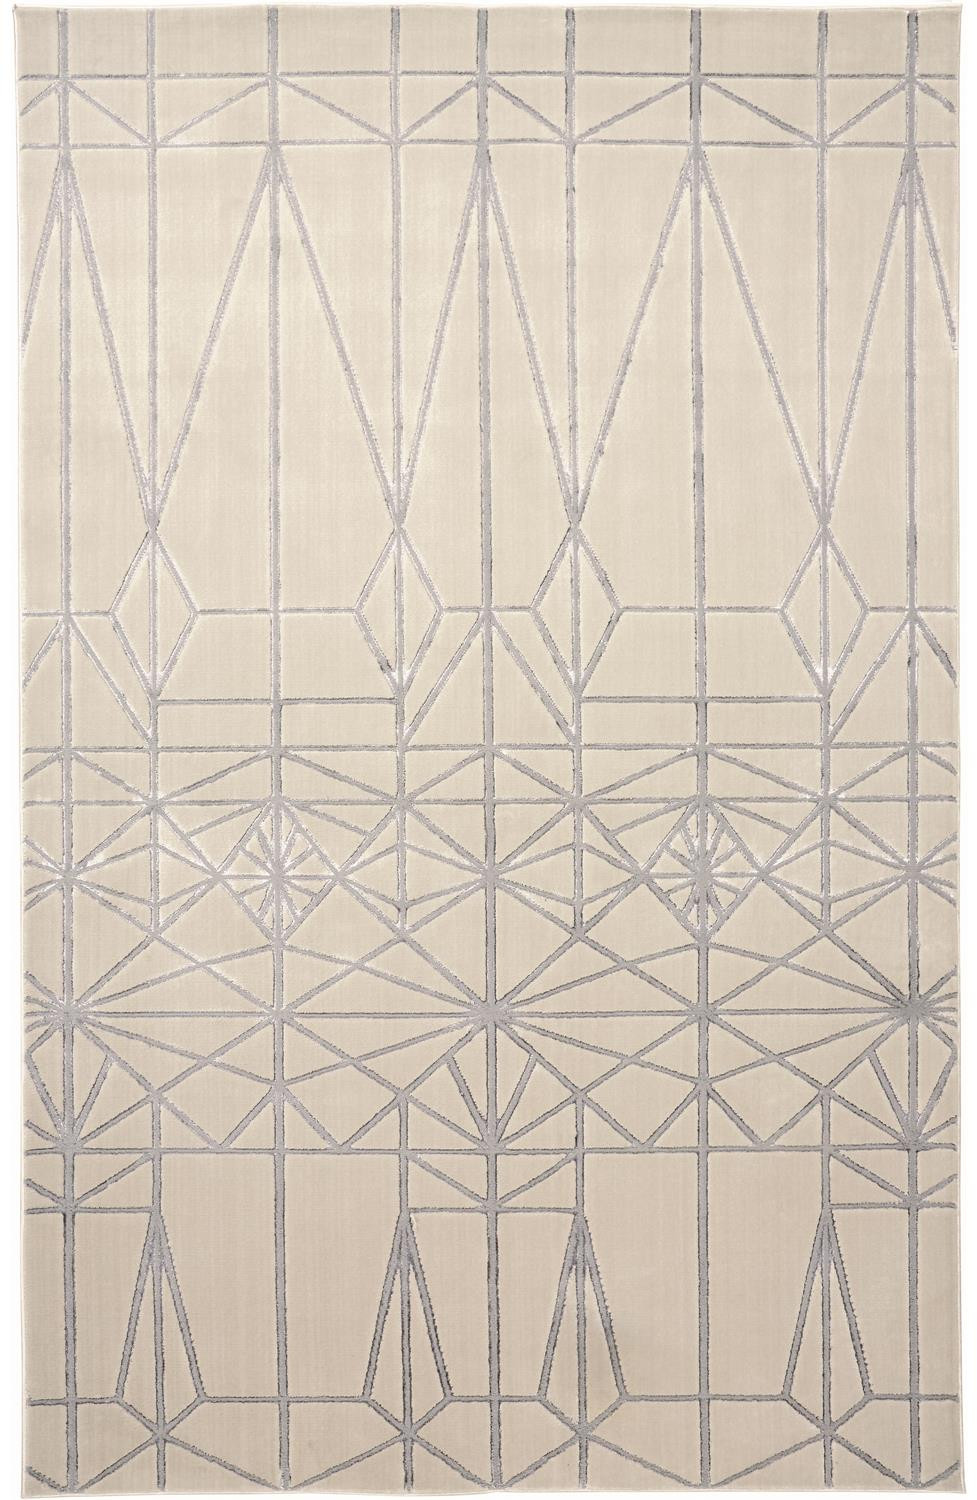 9' X 12' White Silver And Gray Geometric Area Rug-511478-1